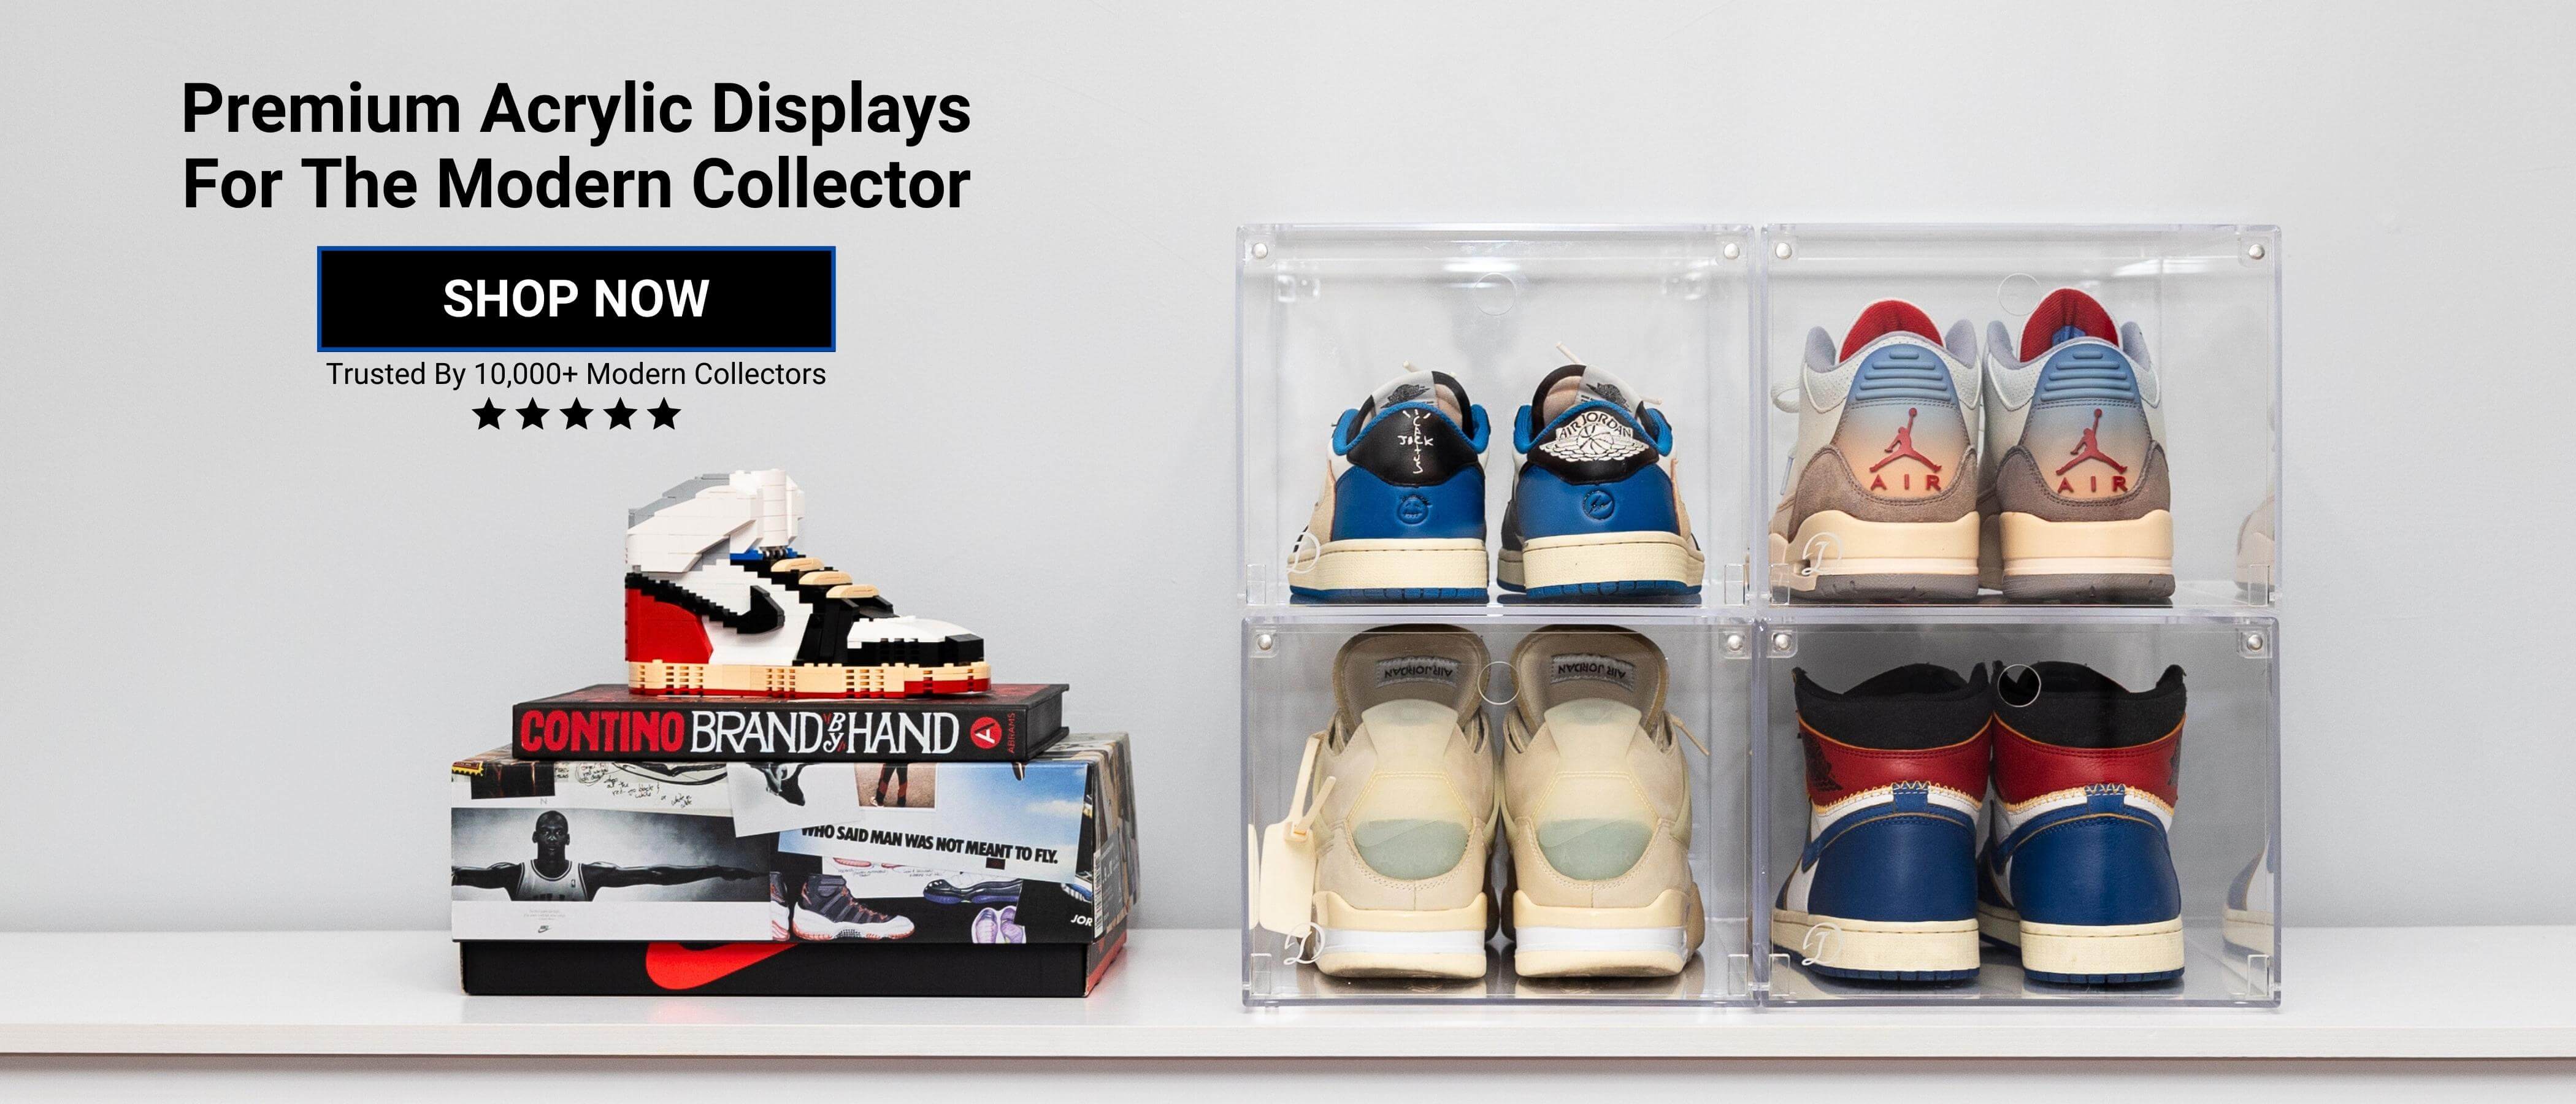 Looksee Designs - Premium Acrylic Displays For The Modern Collector